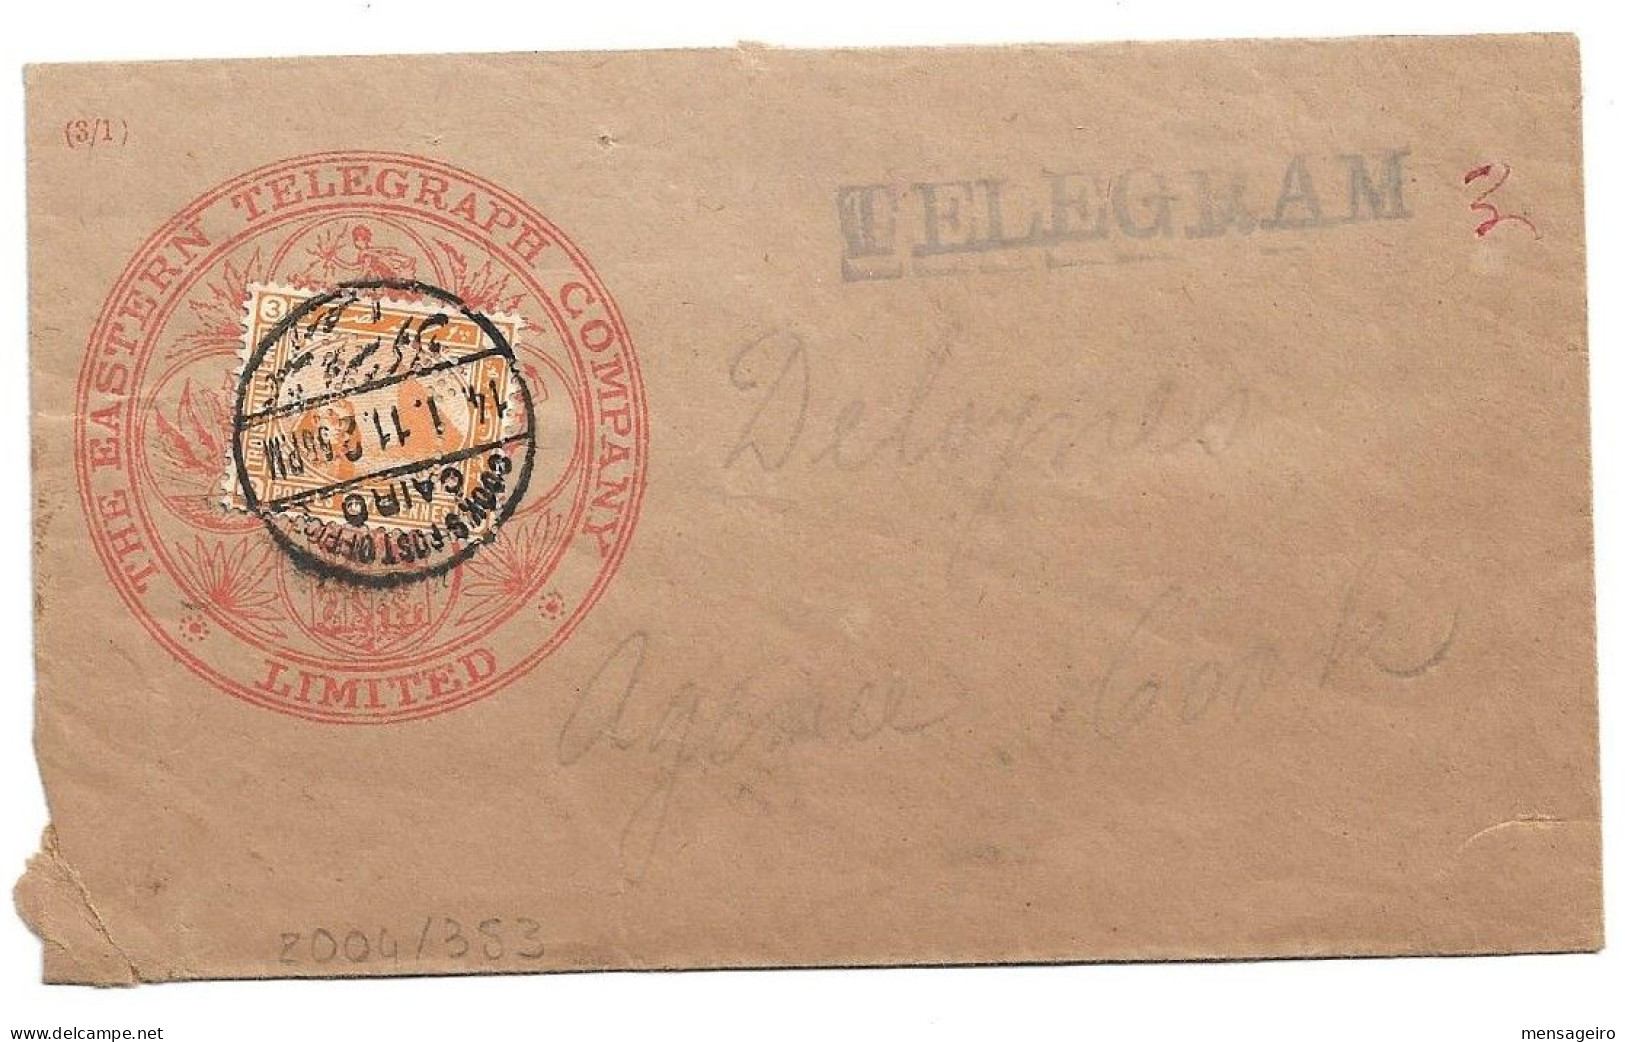 (C04) EASTERN TELEGRAM COVER WITH 3M. STAMP PERFIN "T C/ & S" (INVERTED) - COOKS POST OFFICE / CAIRO => COOK AGENCY - 1866-1914 Ägypten Khediva